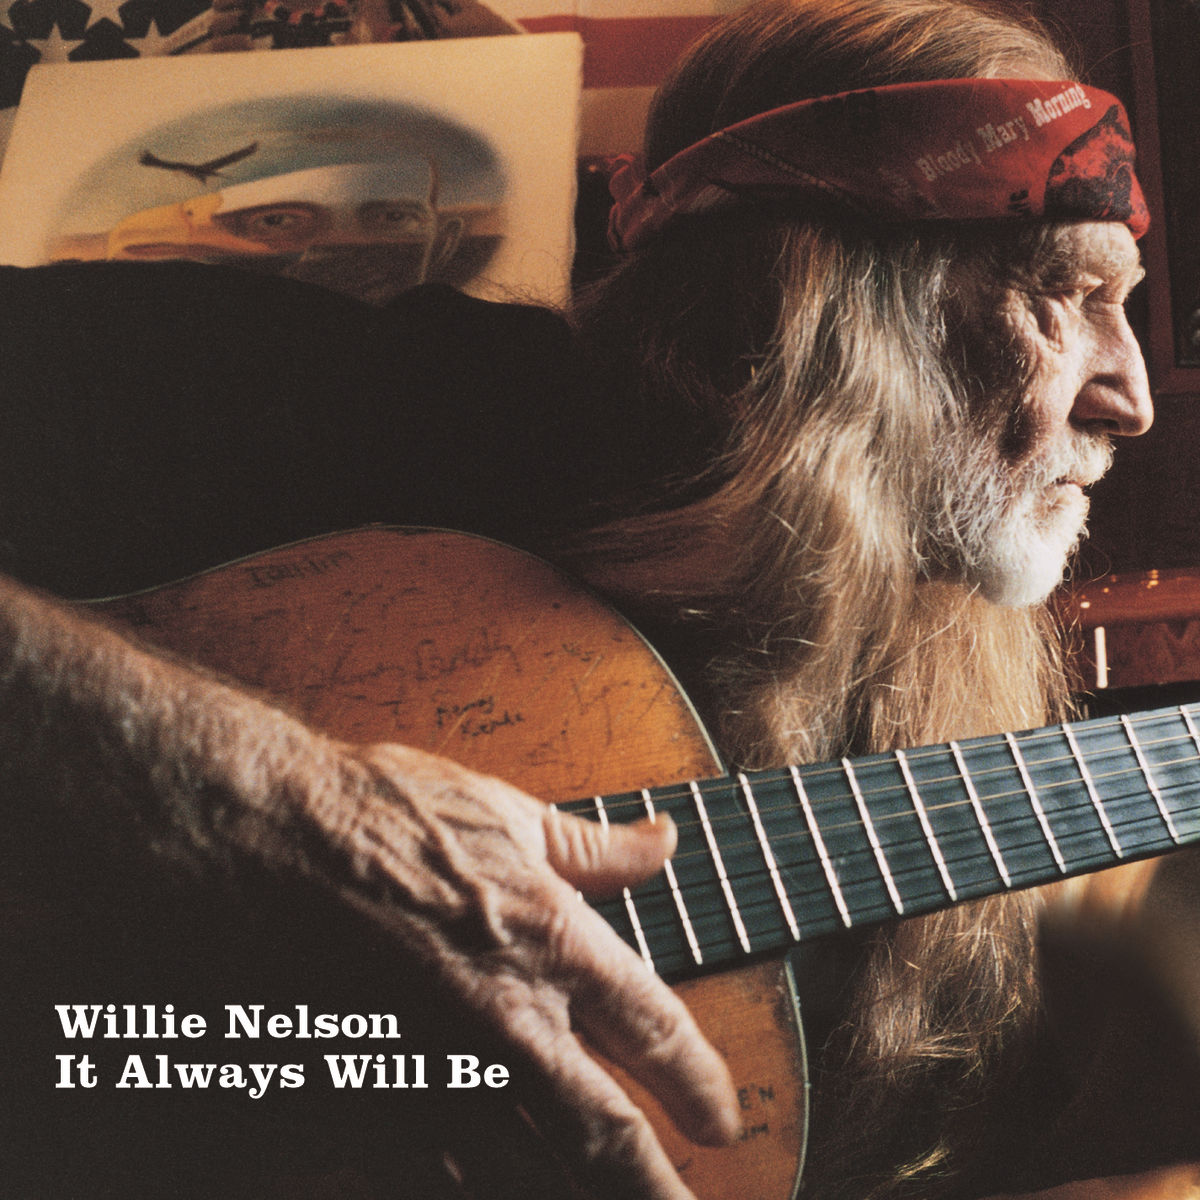 Willie Nelson Speaks Out Against Anti